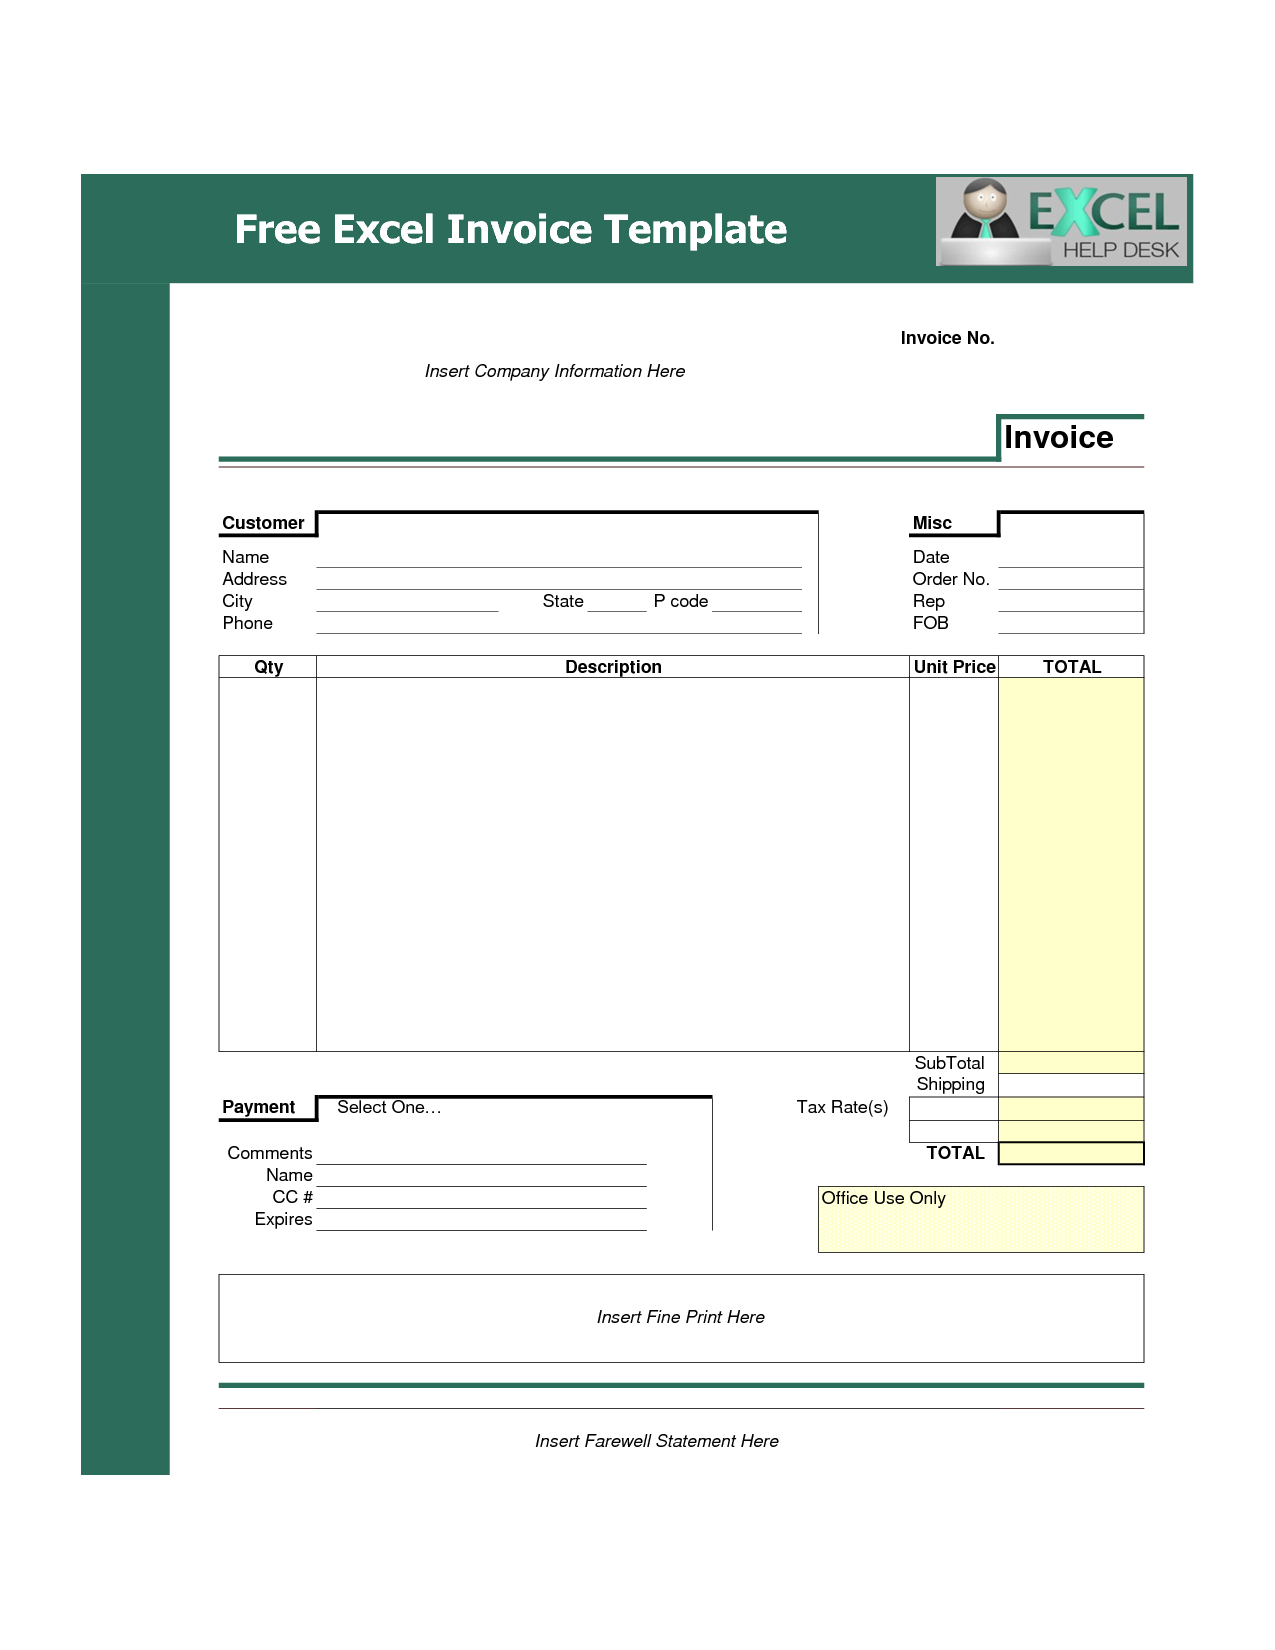 invoice-template-excel-free-download-free-spreadsheet-excel-spreadsheet-templates-spreadsheet